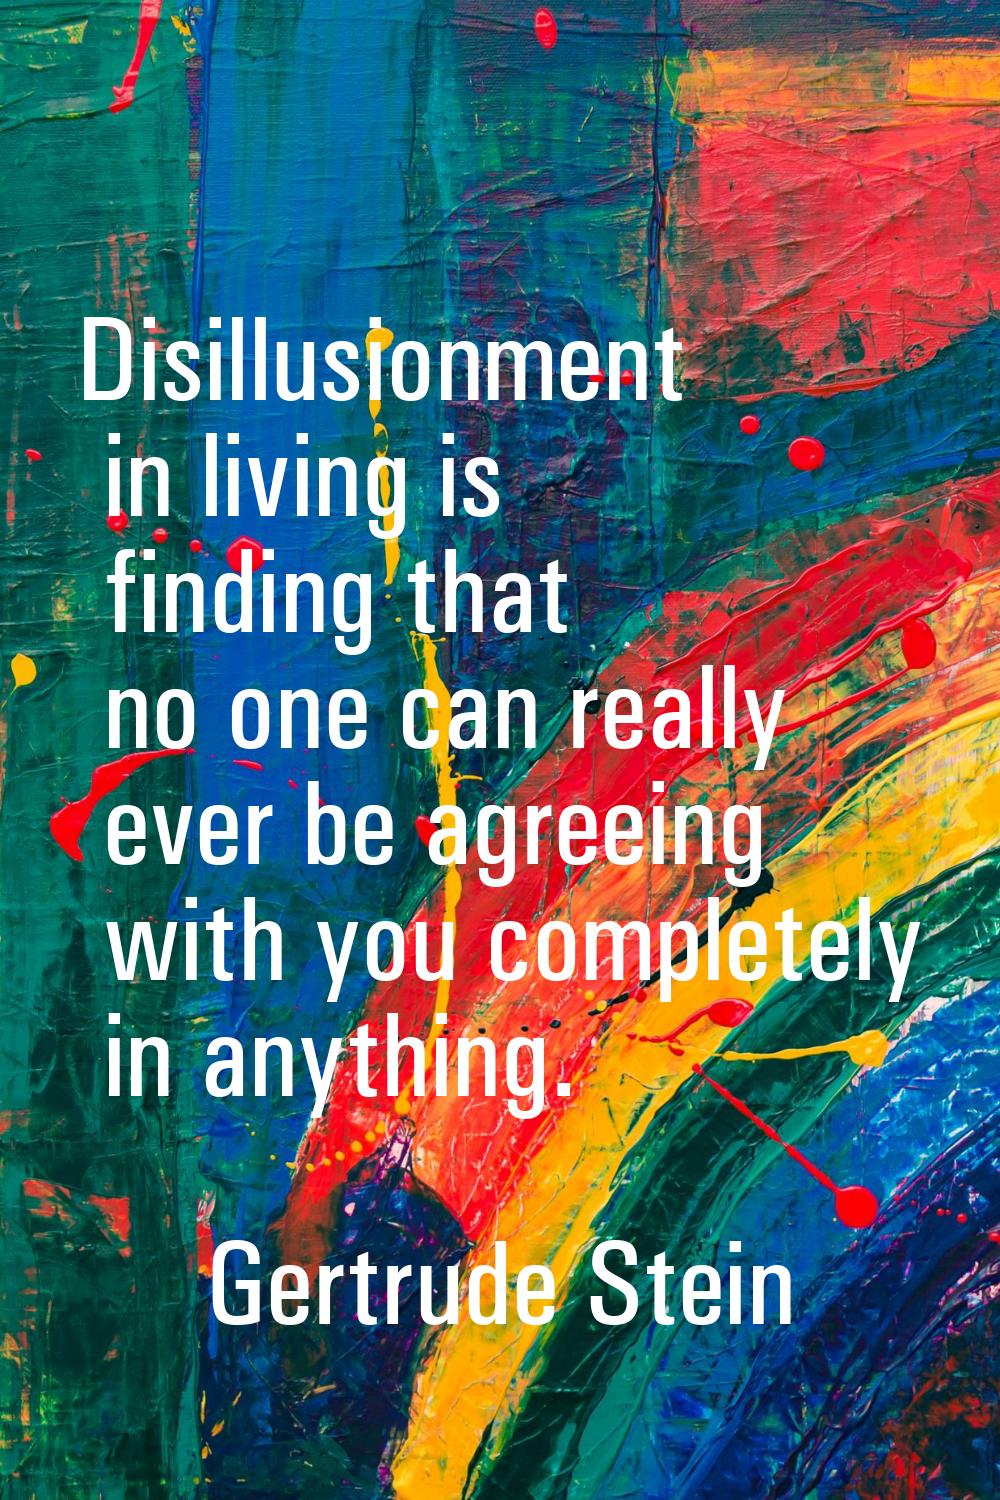 Disillusionment in living is finding that no one can really ever be agreeing with you completely in